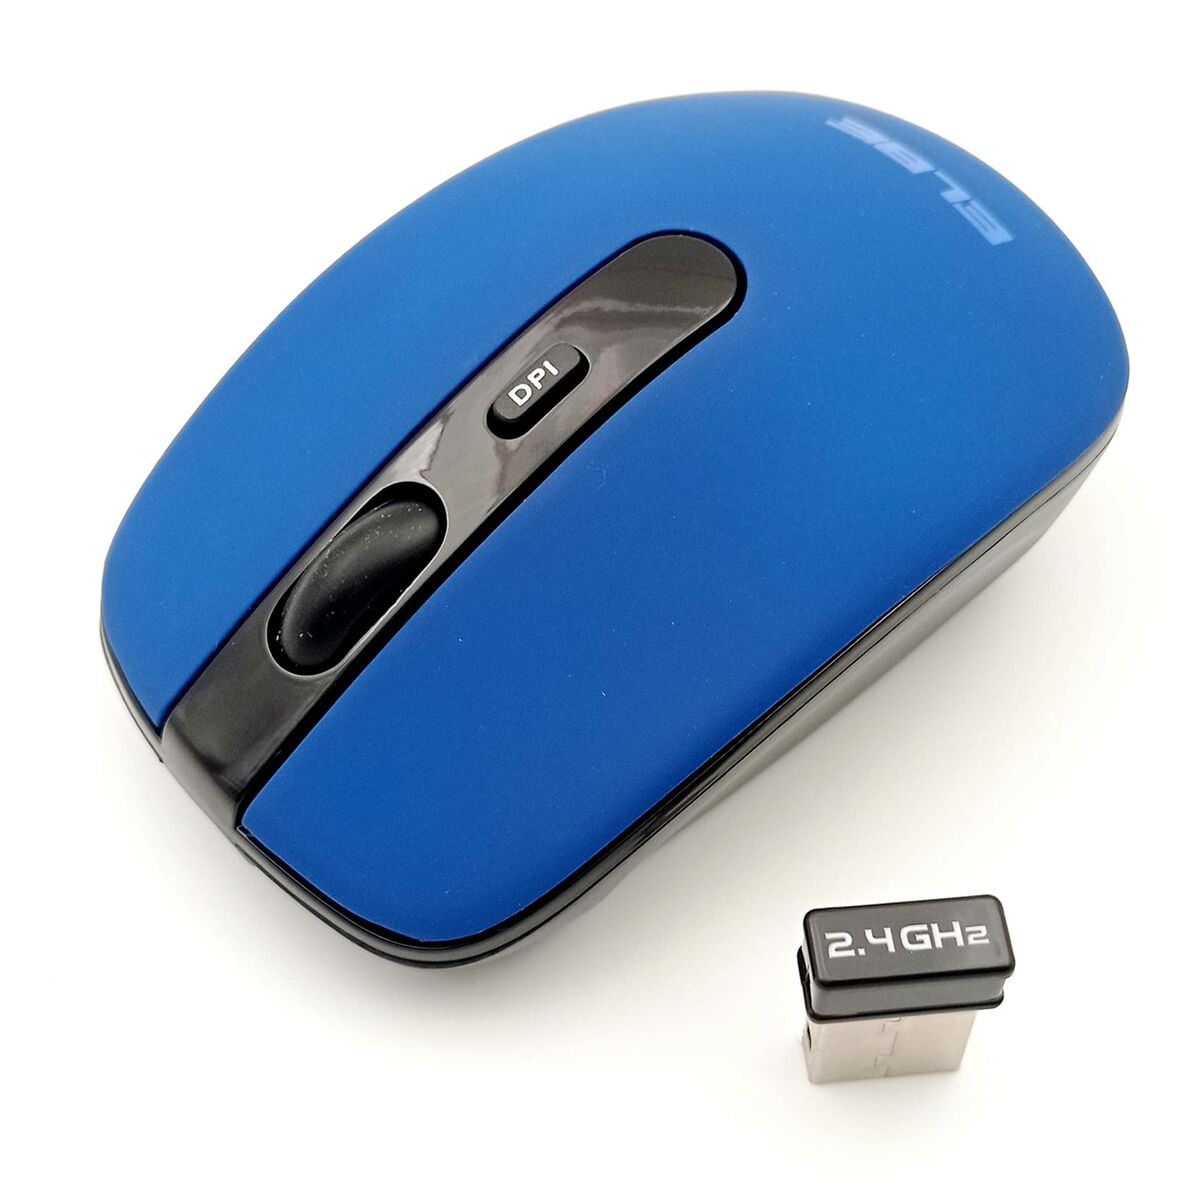 Wireless Mouse ELBE RT-110, ELBE, Computing, Accessories, wireless-mouse-elbe-rt-110, Brand_ELBE, category-reference-2609, category-reference-2642, category-reference-2656, category-reference-t-19685, category-reference-t-19908, category-reference-t-21353, computers / peripherals, Condition_NEW, office, Price_20 - 50, Teleworking, RiotNook